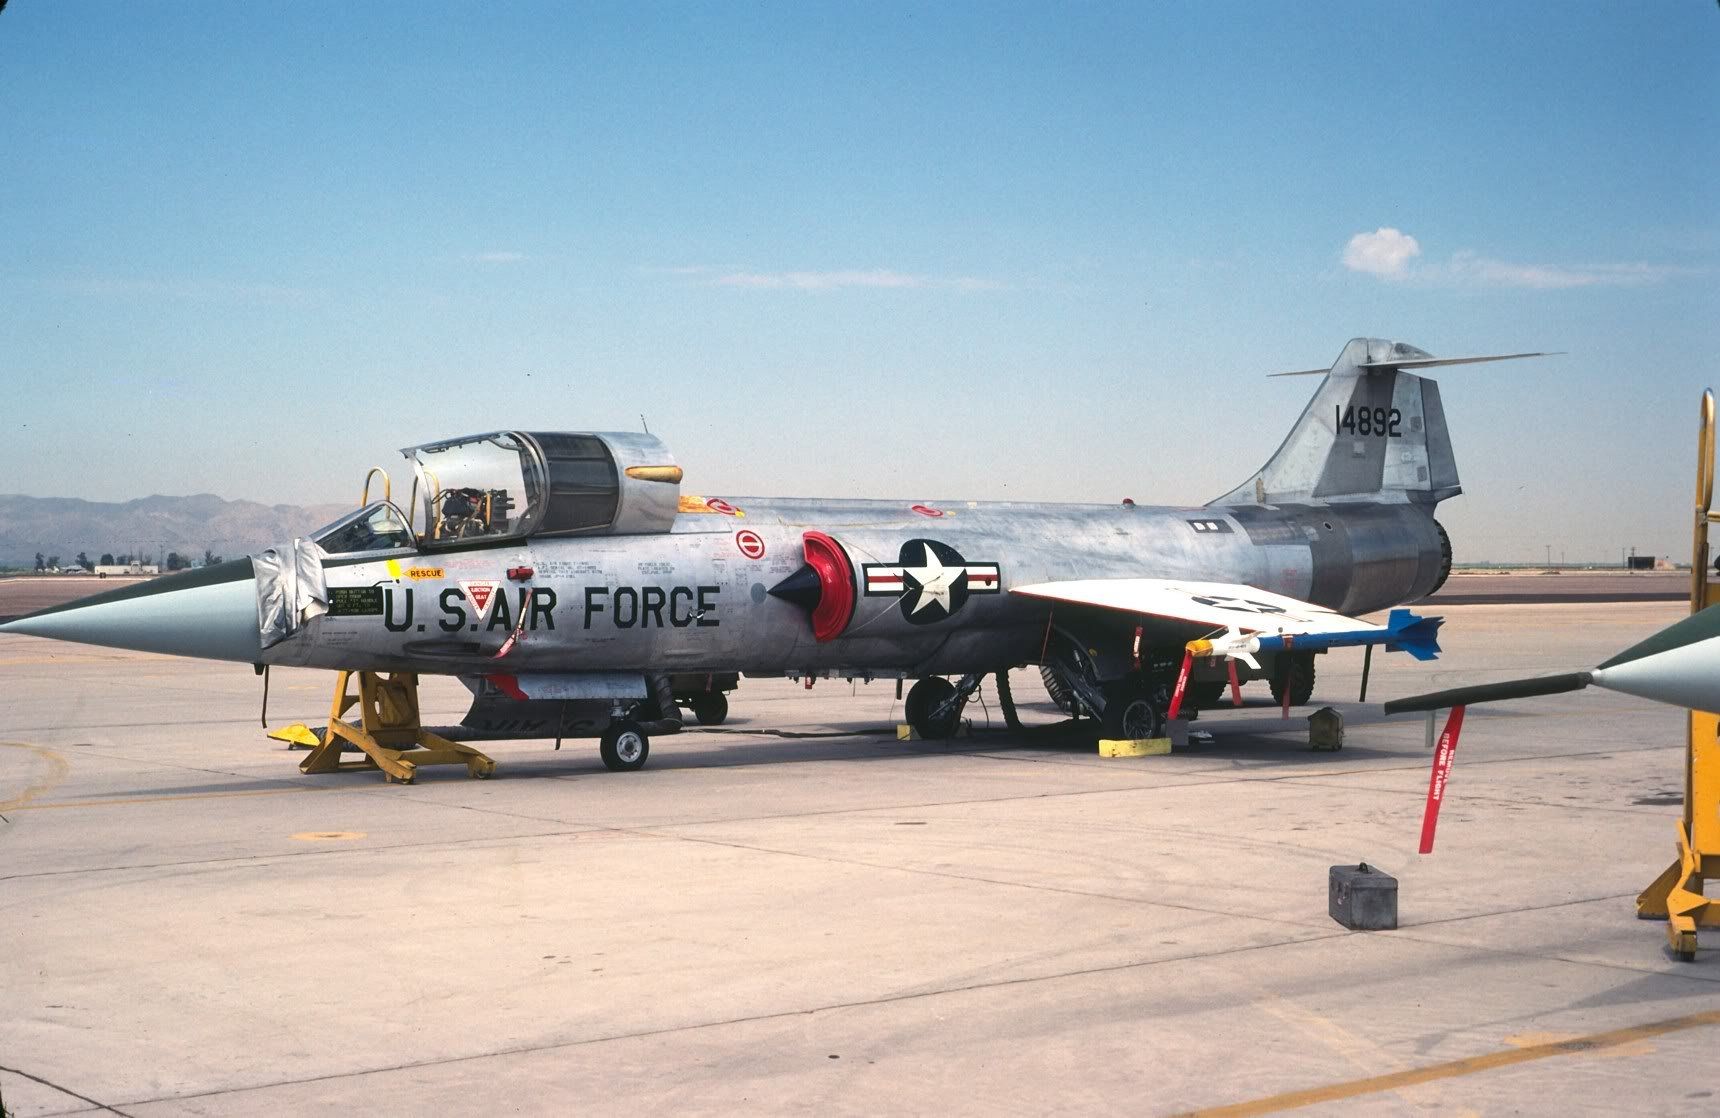 Aircrafts army Fighter jets USA lockheed F-104 starfighter ...